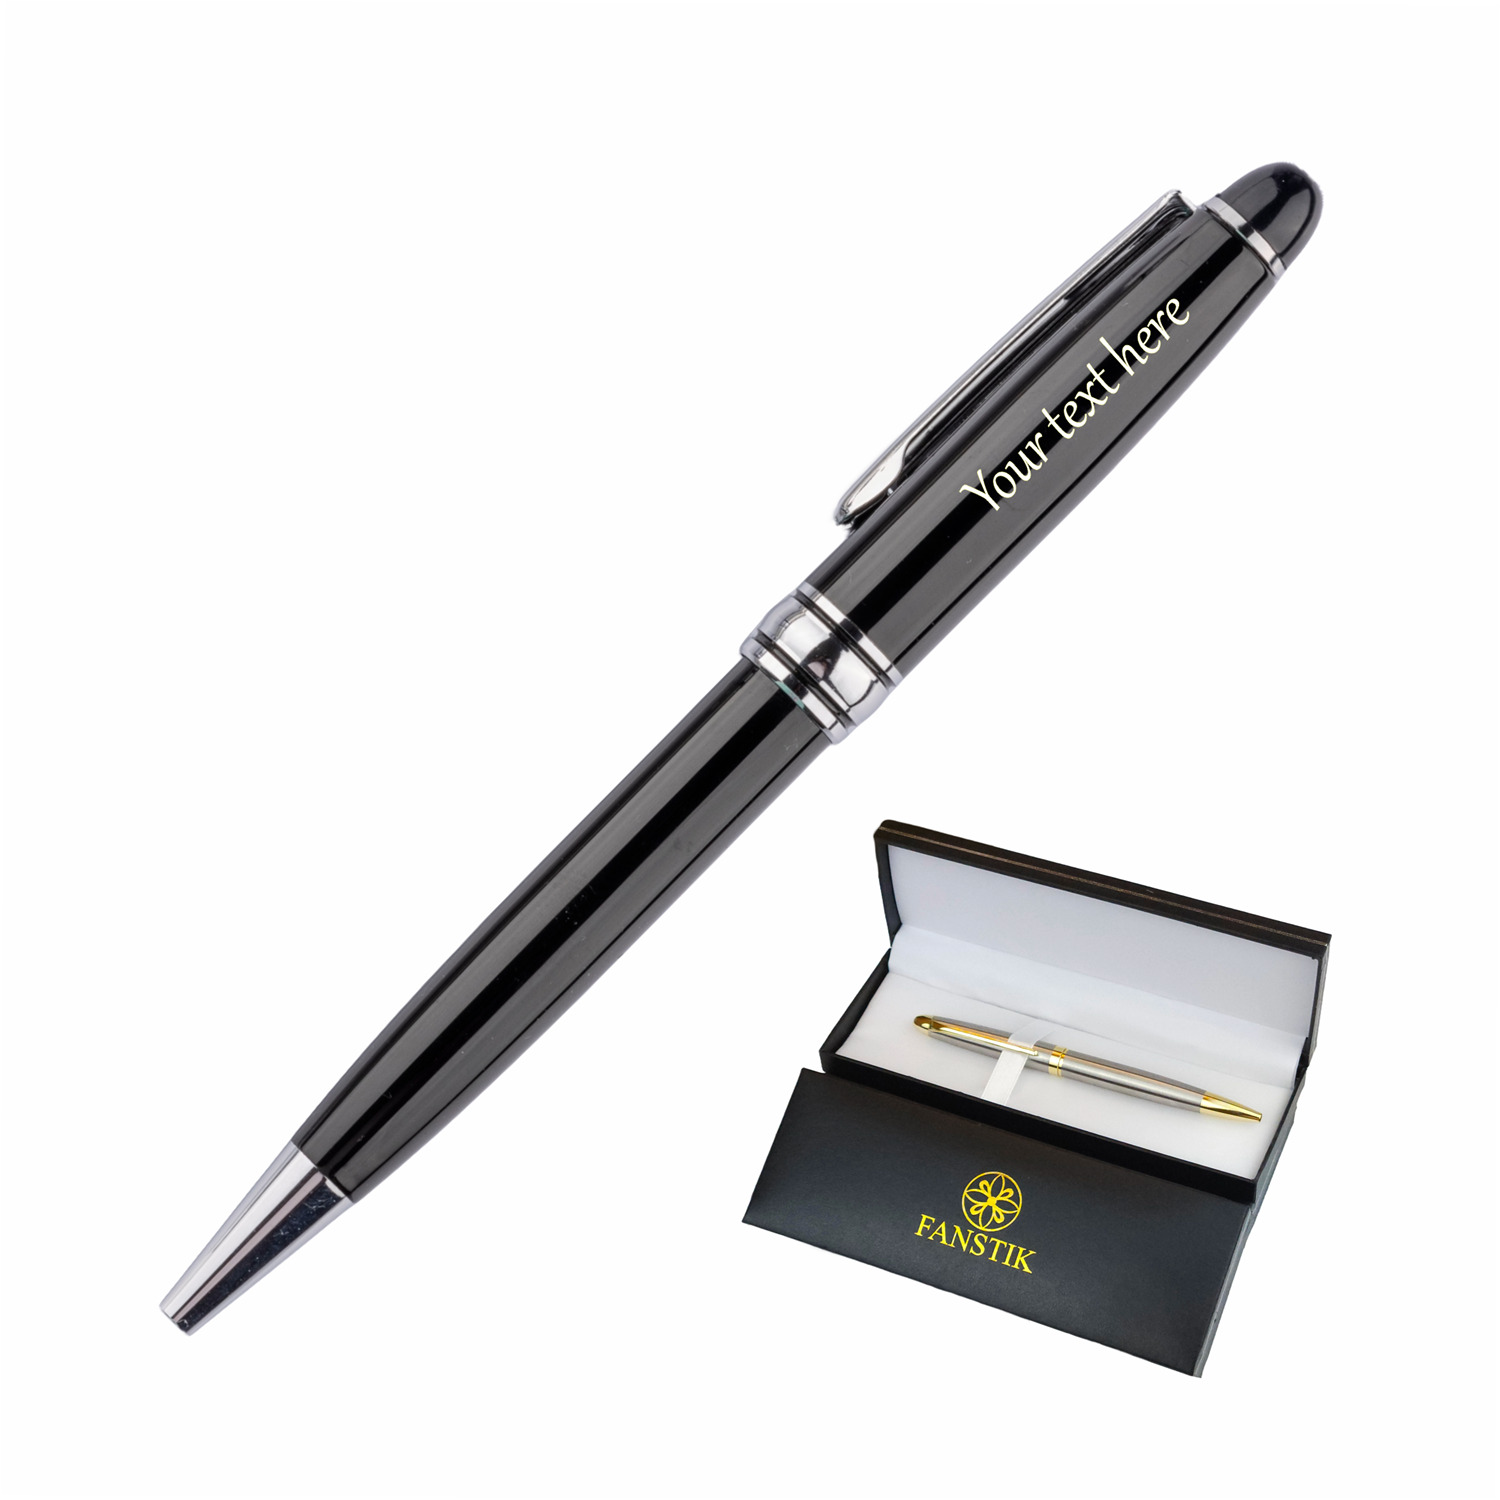 Personalized Pen, Elegant Engraved Pen. Luxury Customized Black and Silver Pen